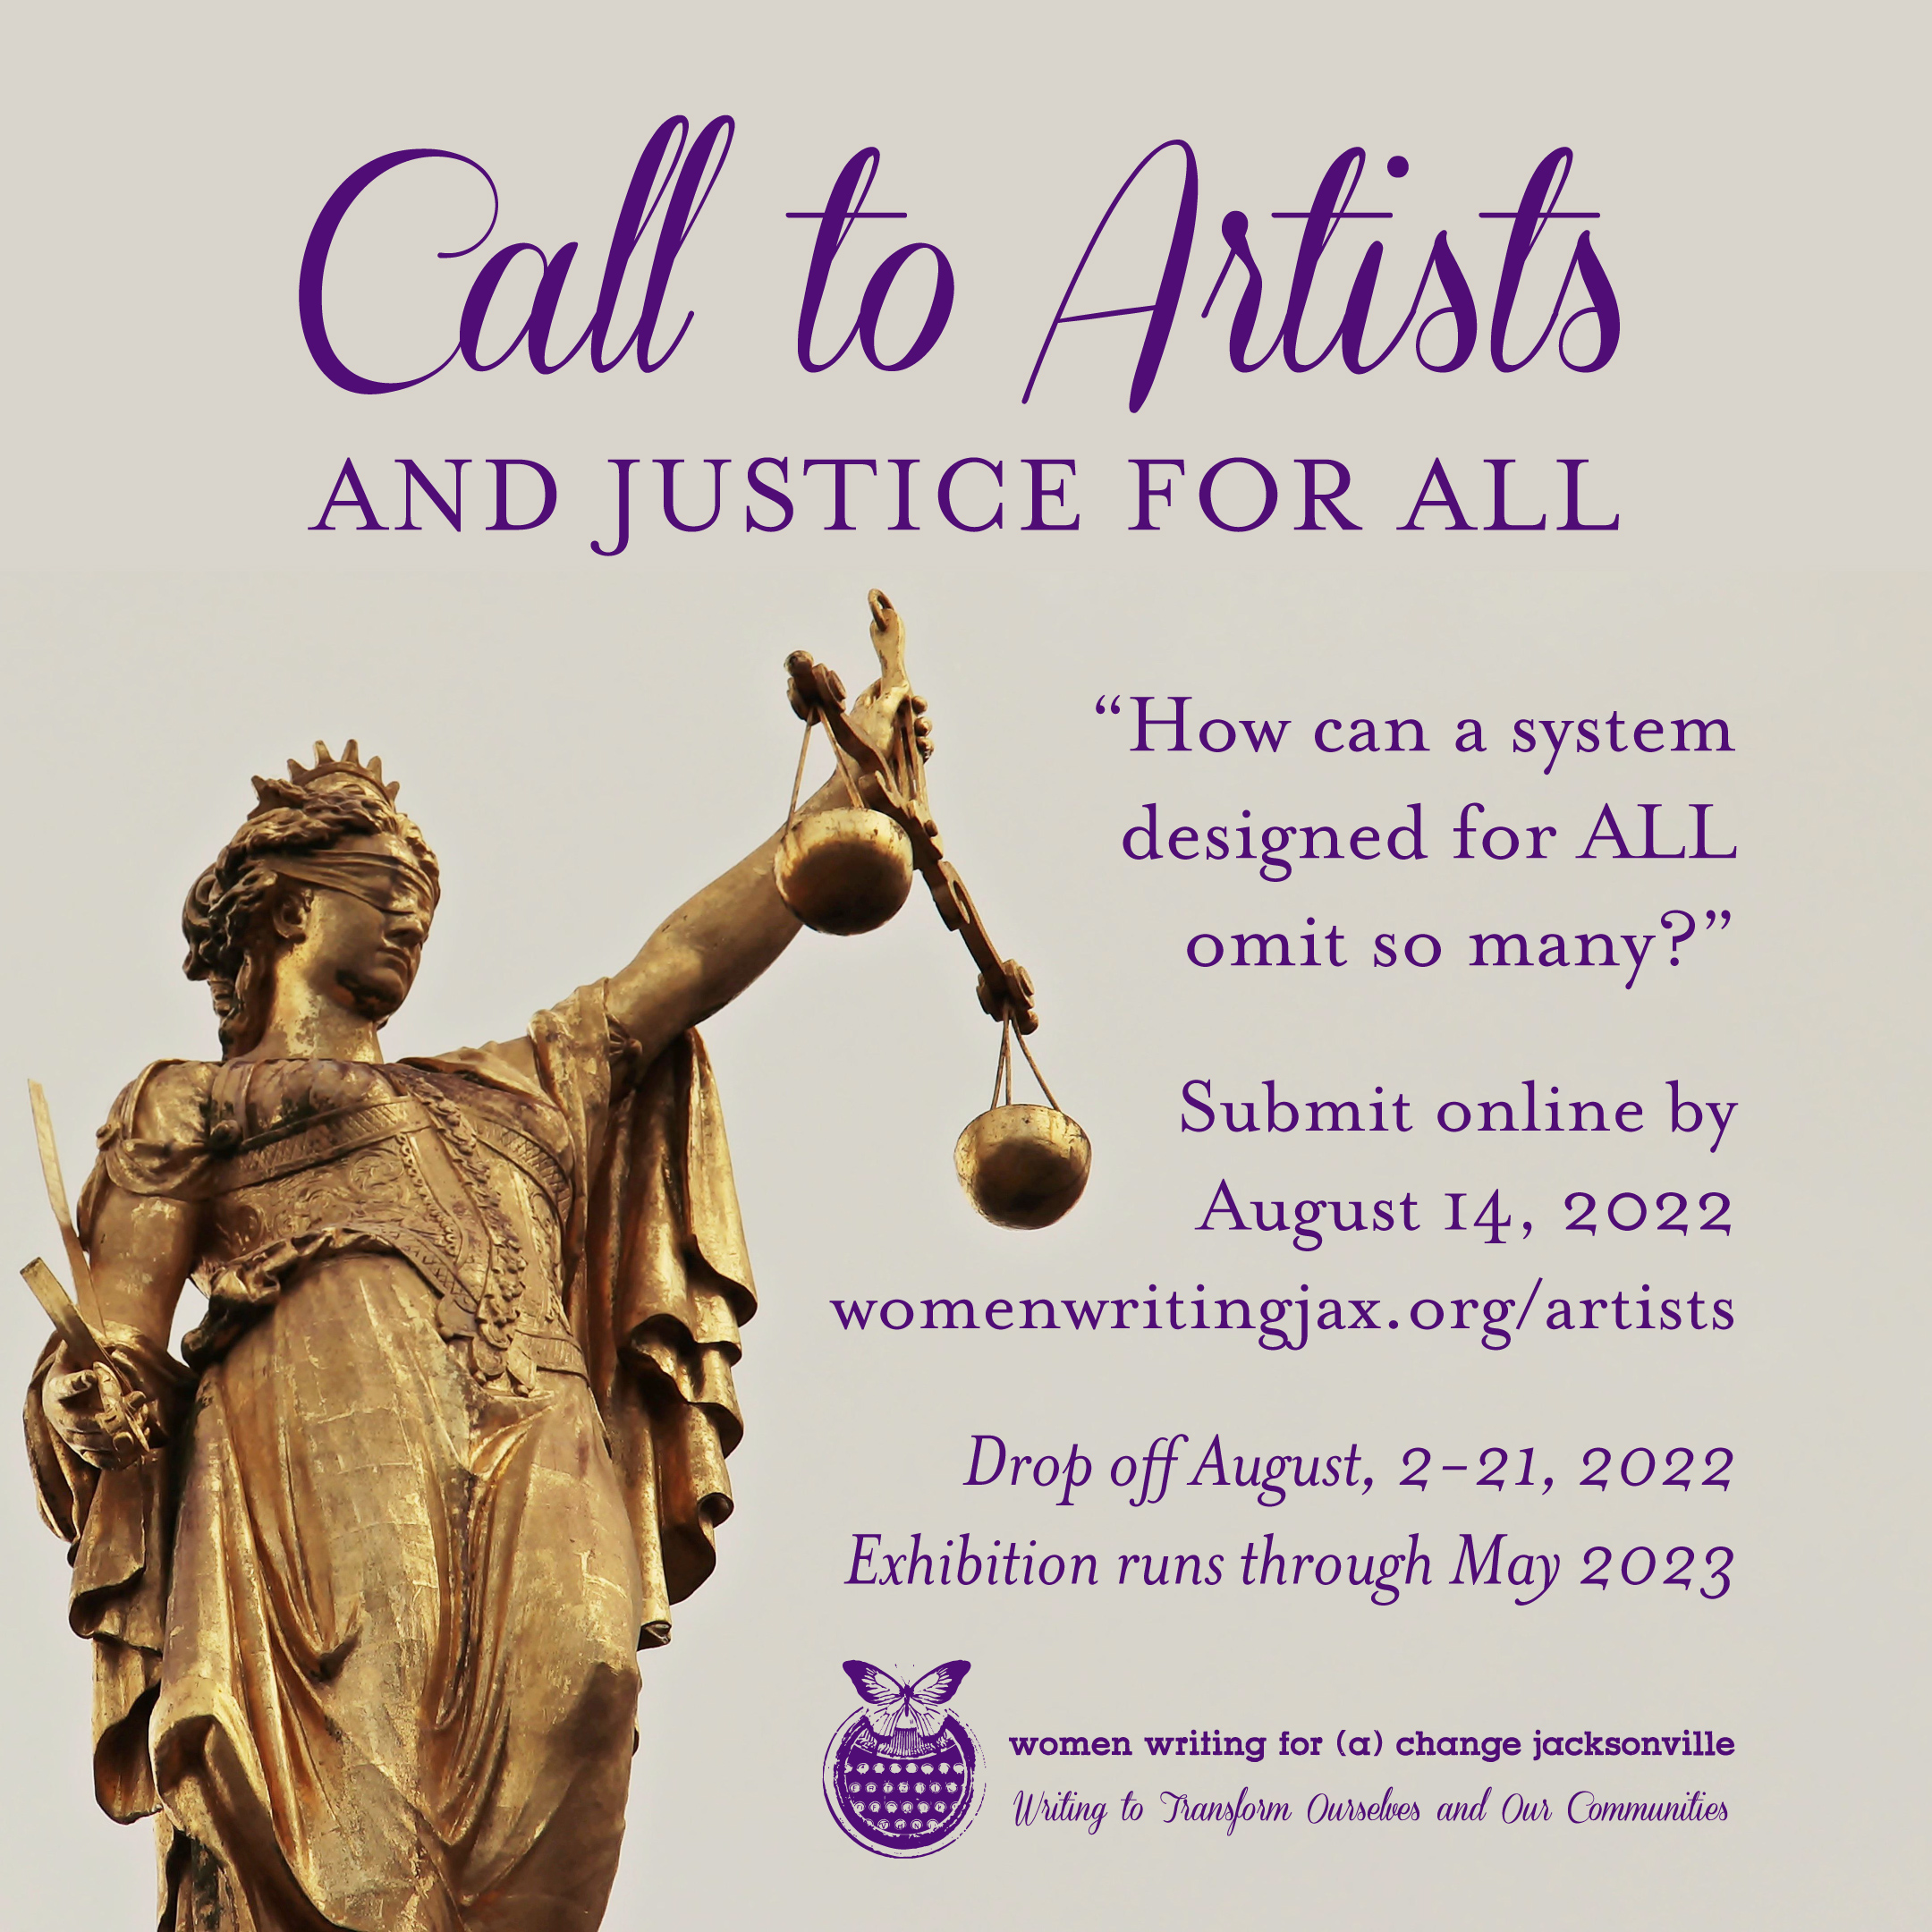 Call To Artists: And Justice for All. "How can a system designed for ALL omit so many?" Submit online by August 14.